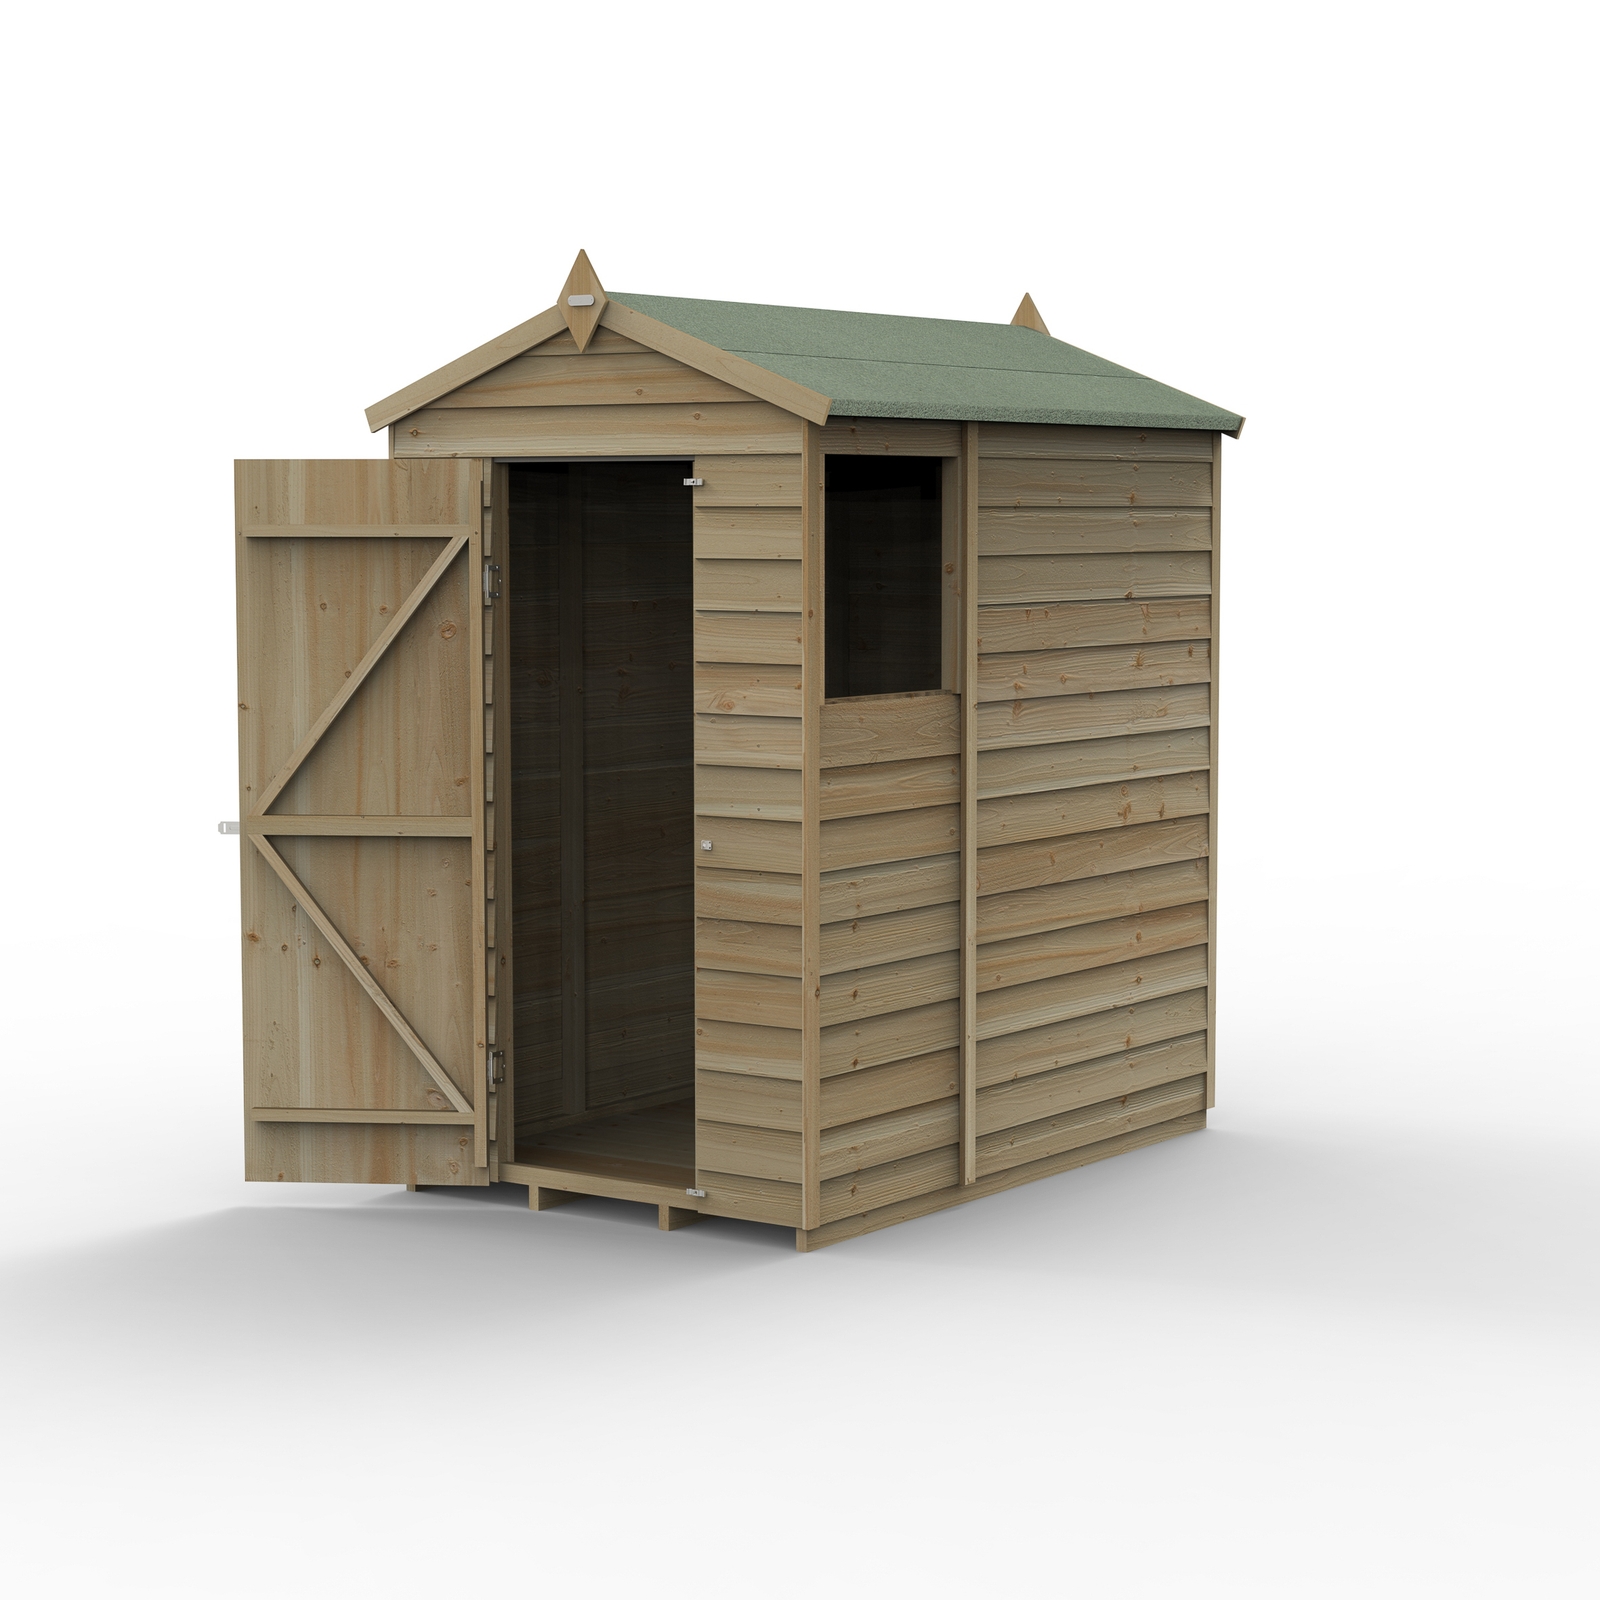 Forest Garden 4LIFE Apex Shed 4 x 6ft - Single Door 1 Window (Including Installation)